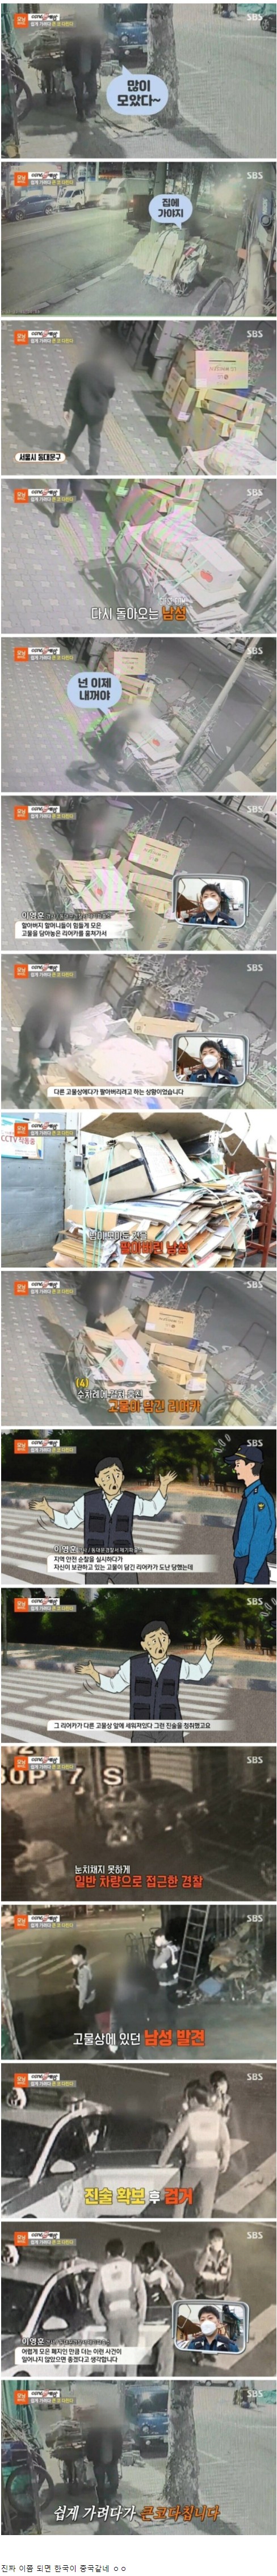 Stealing the waste paper that others have collected.jpg